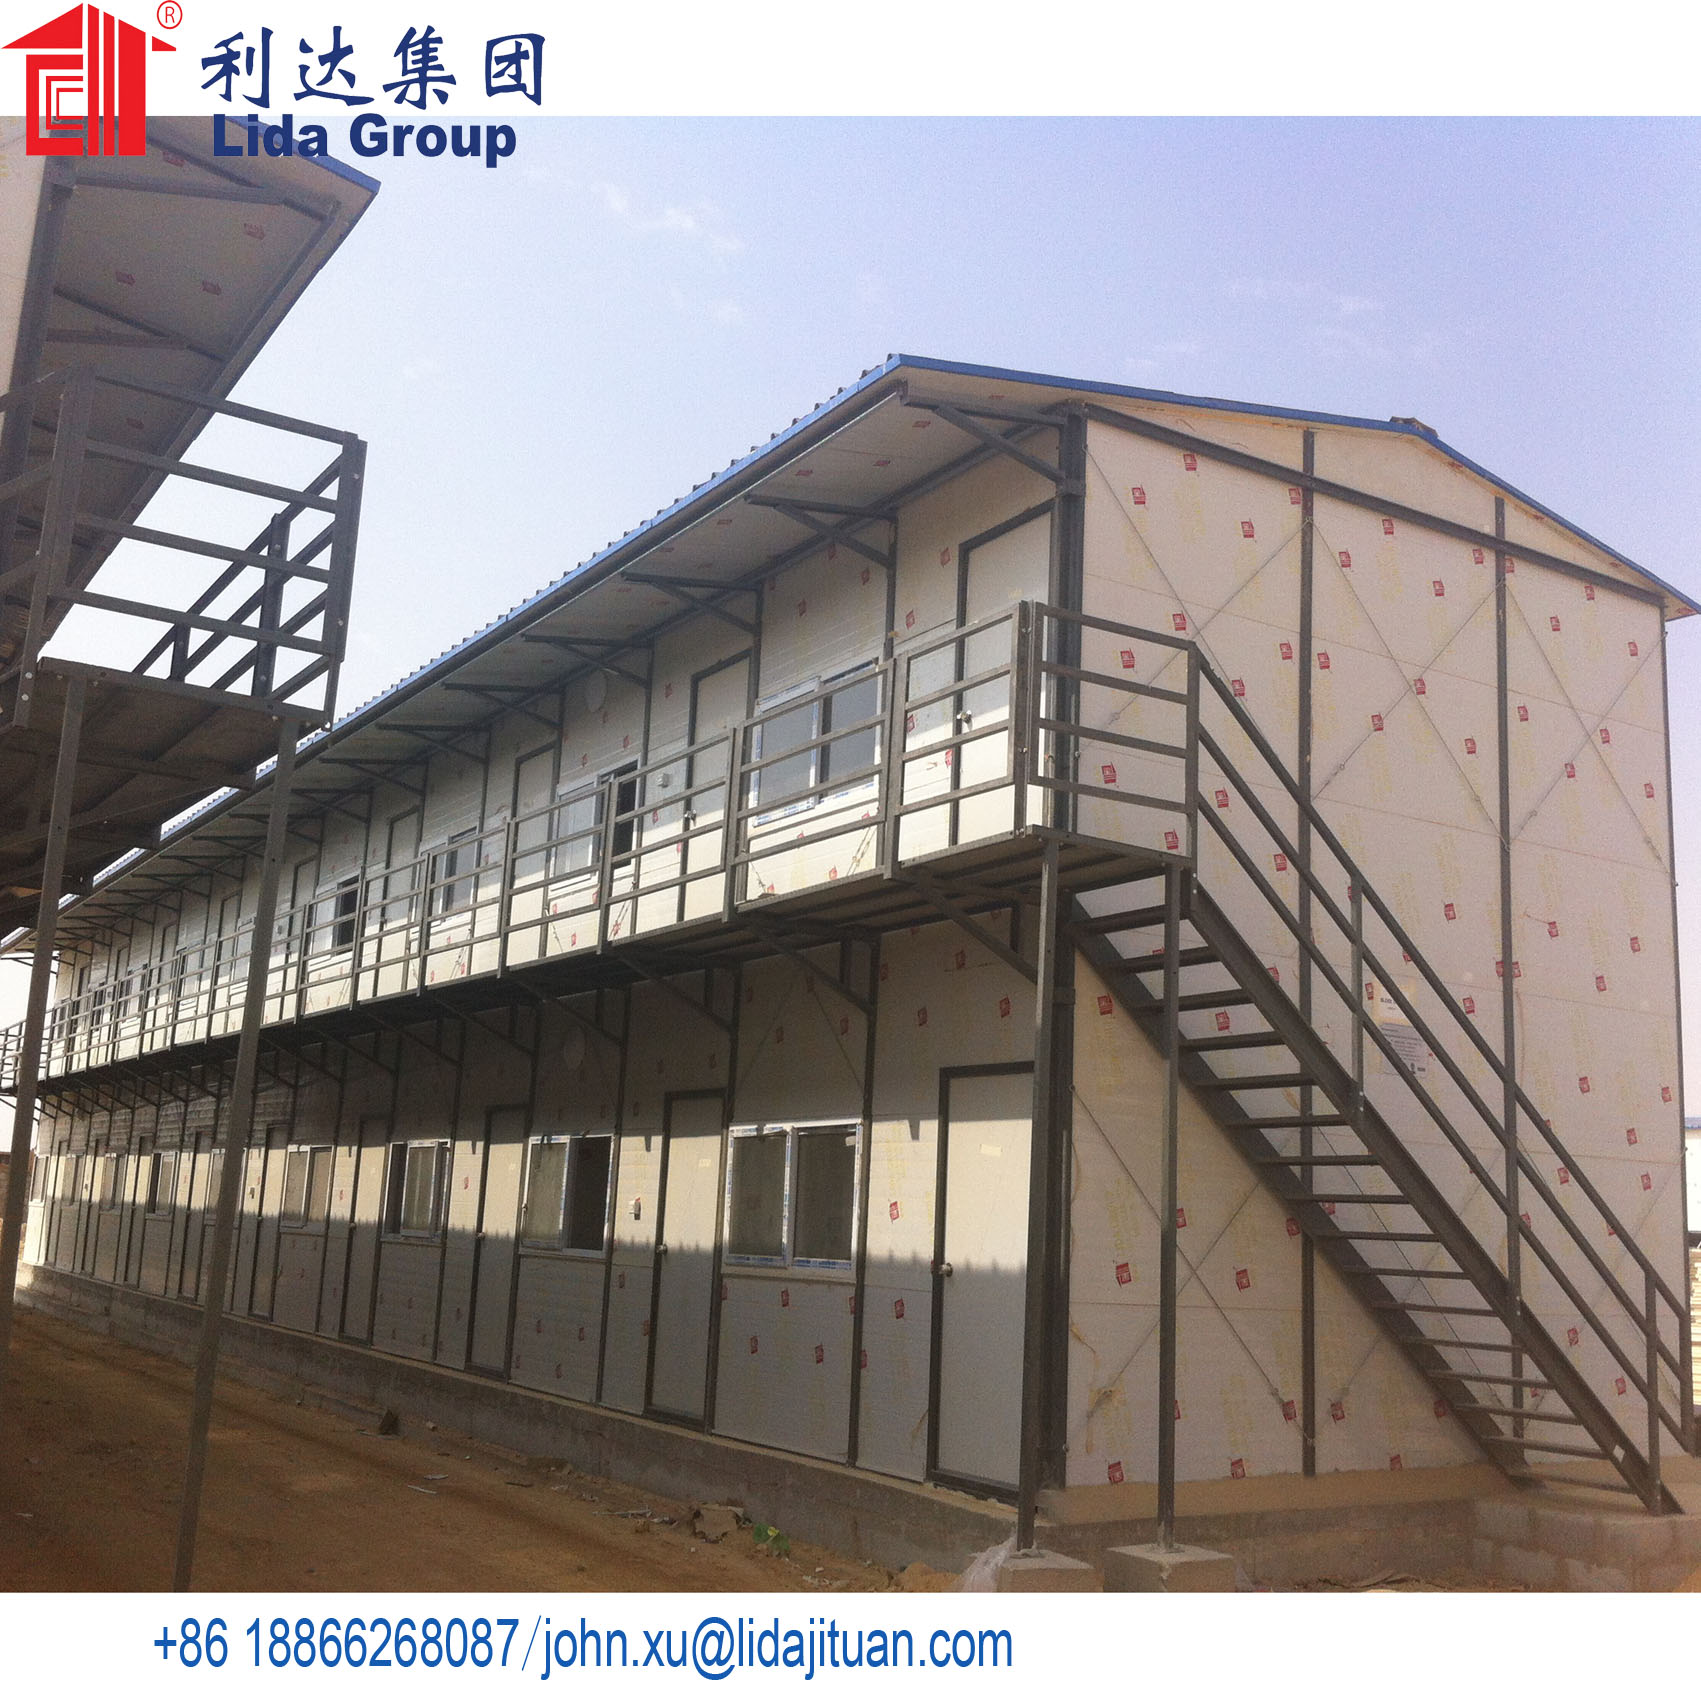 africa fast construction steel structure prefabricated house worker camp